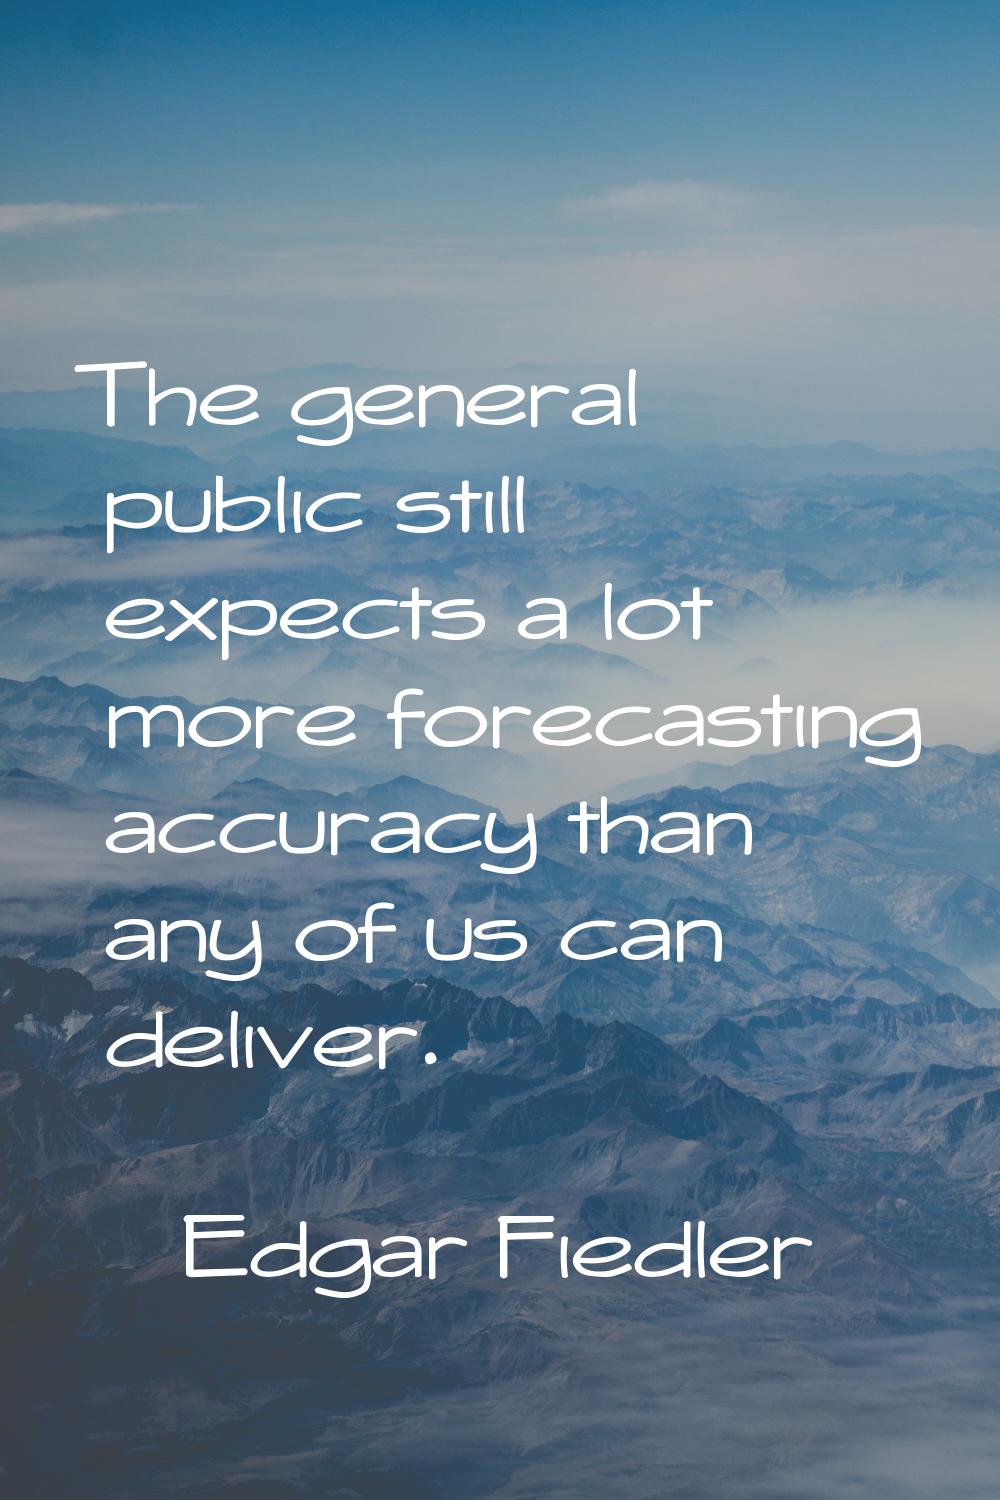 The general public still expects a lot more forecasting accuracy than any of us can deliver.